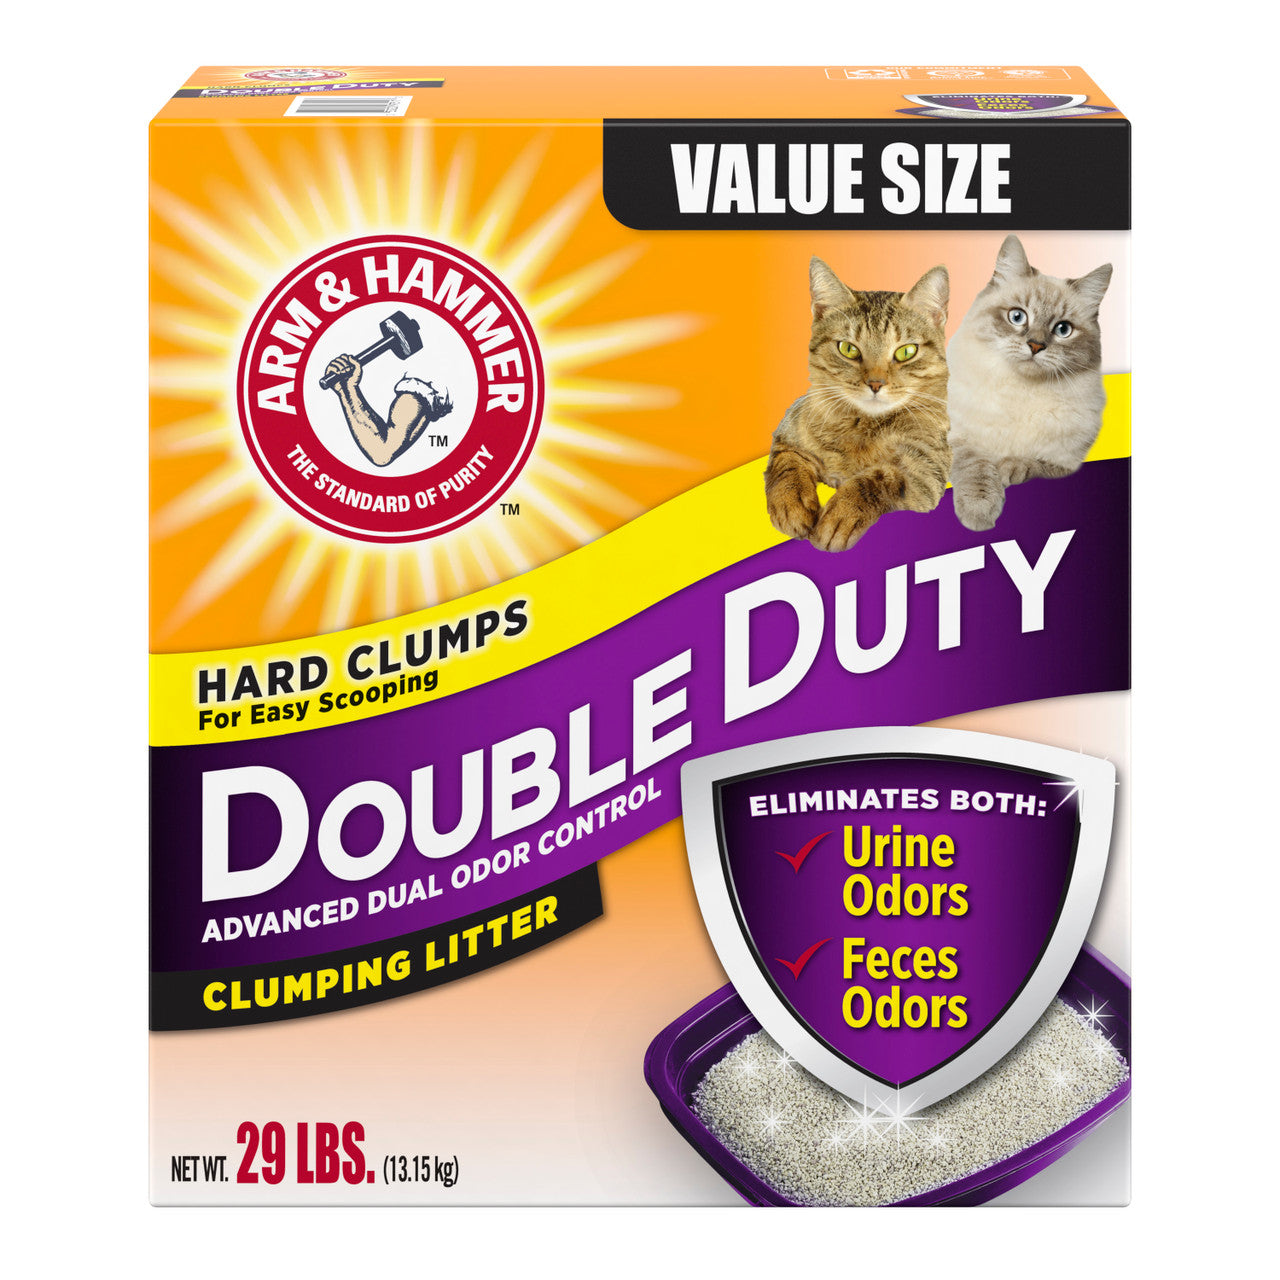 Arm & Hammer Double Duty Dual Odor Control Clumping Cat Litter 29lb